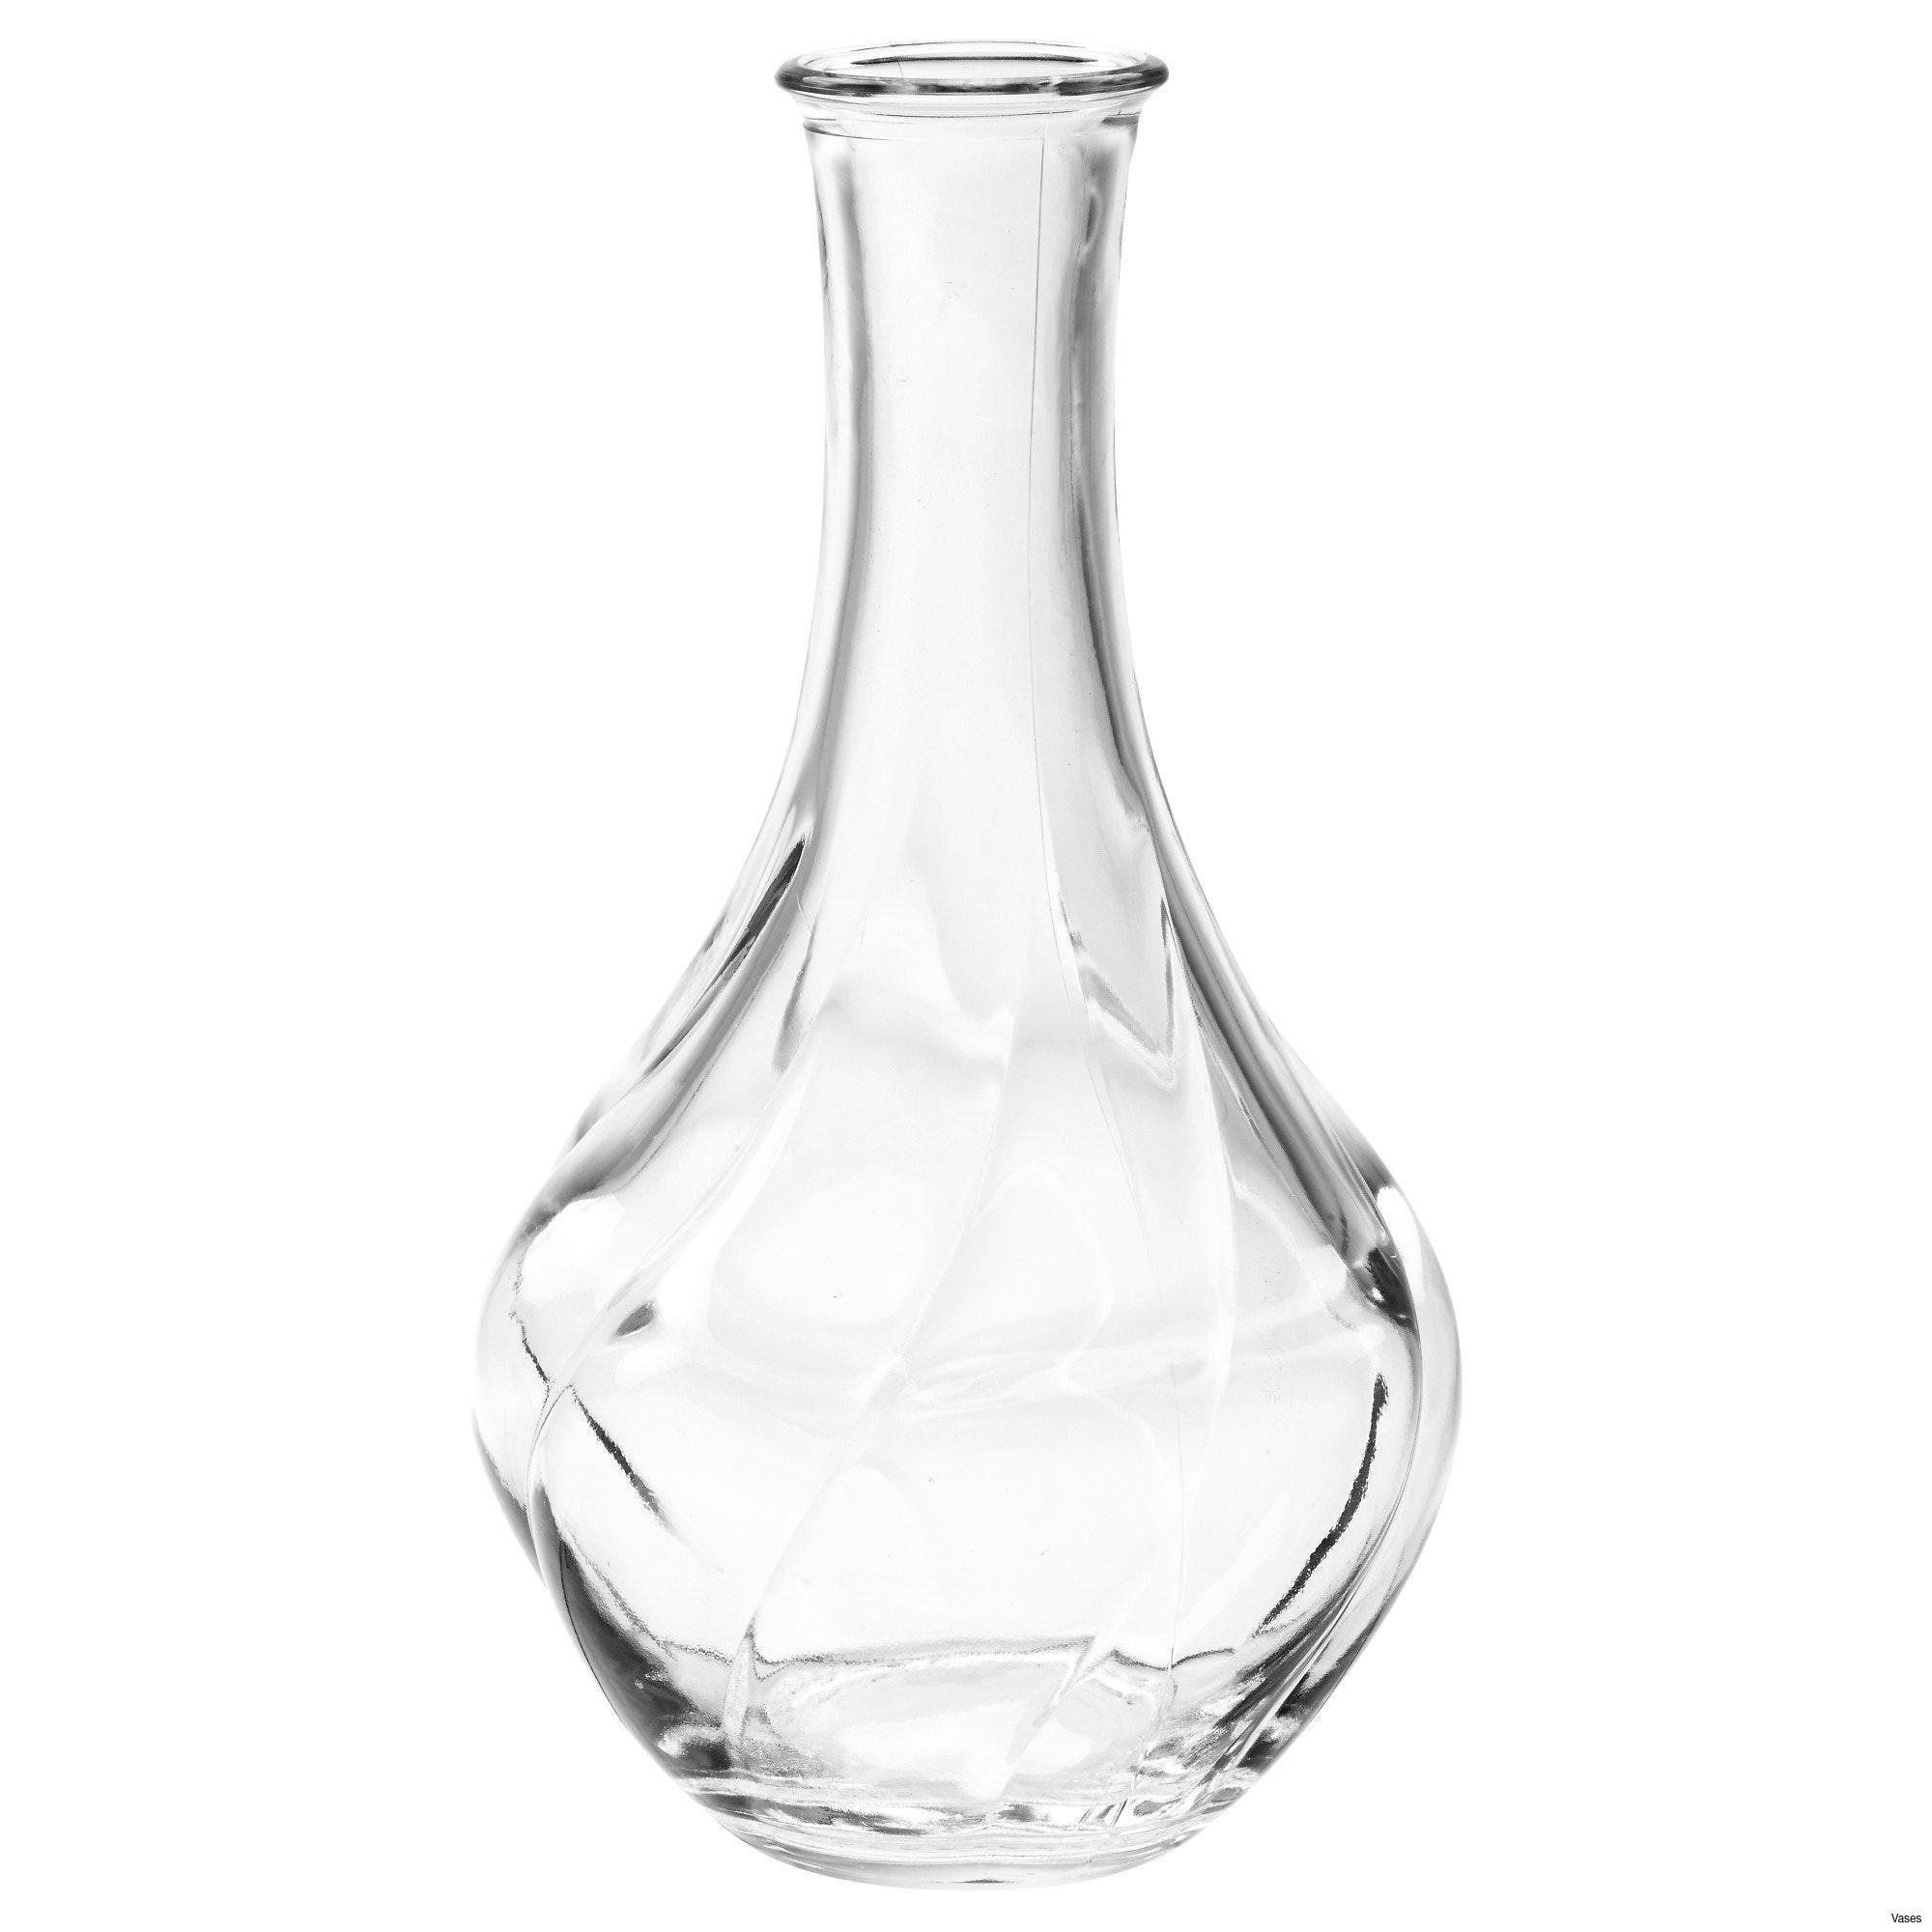 23 Stylish Kaiser Porcelain Vase Value 2024 free download kaiser porcelain vase value of large white vases collection black floor vase vases artificial inside large white vases photos living room glass vases fresh clear vase 0d tags amazing and of